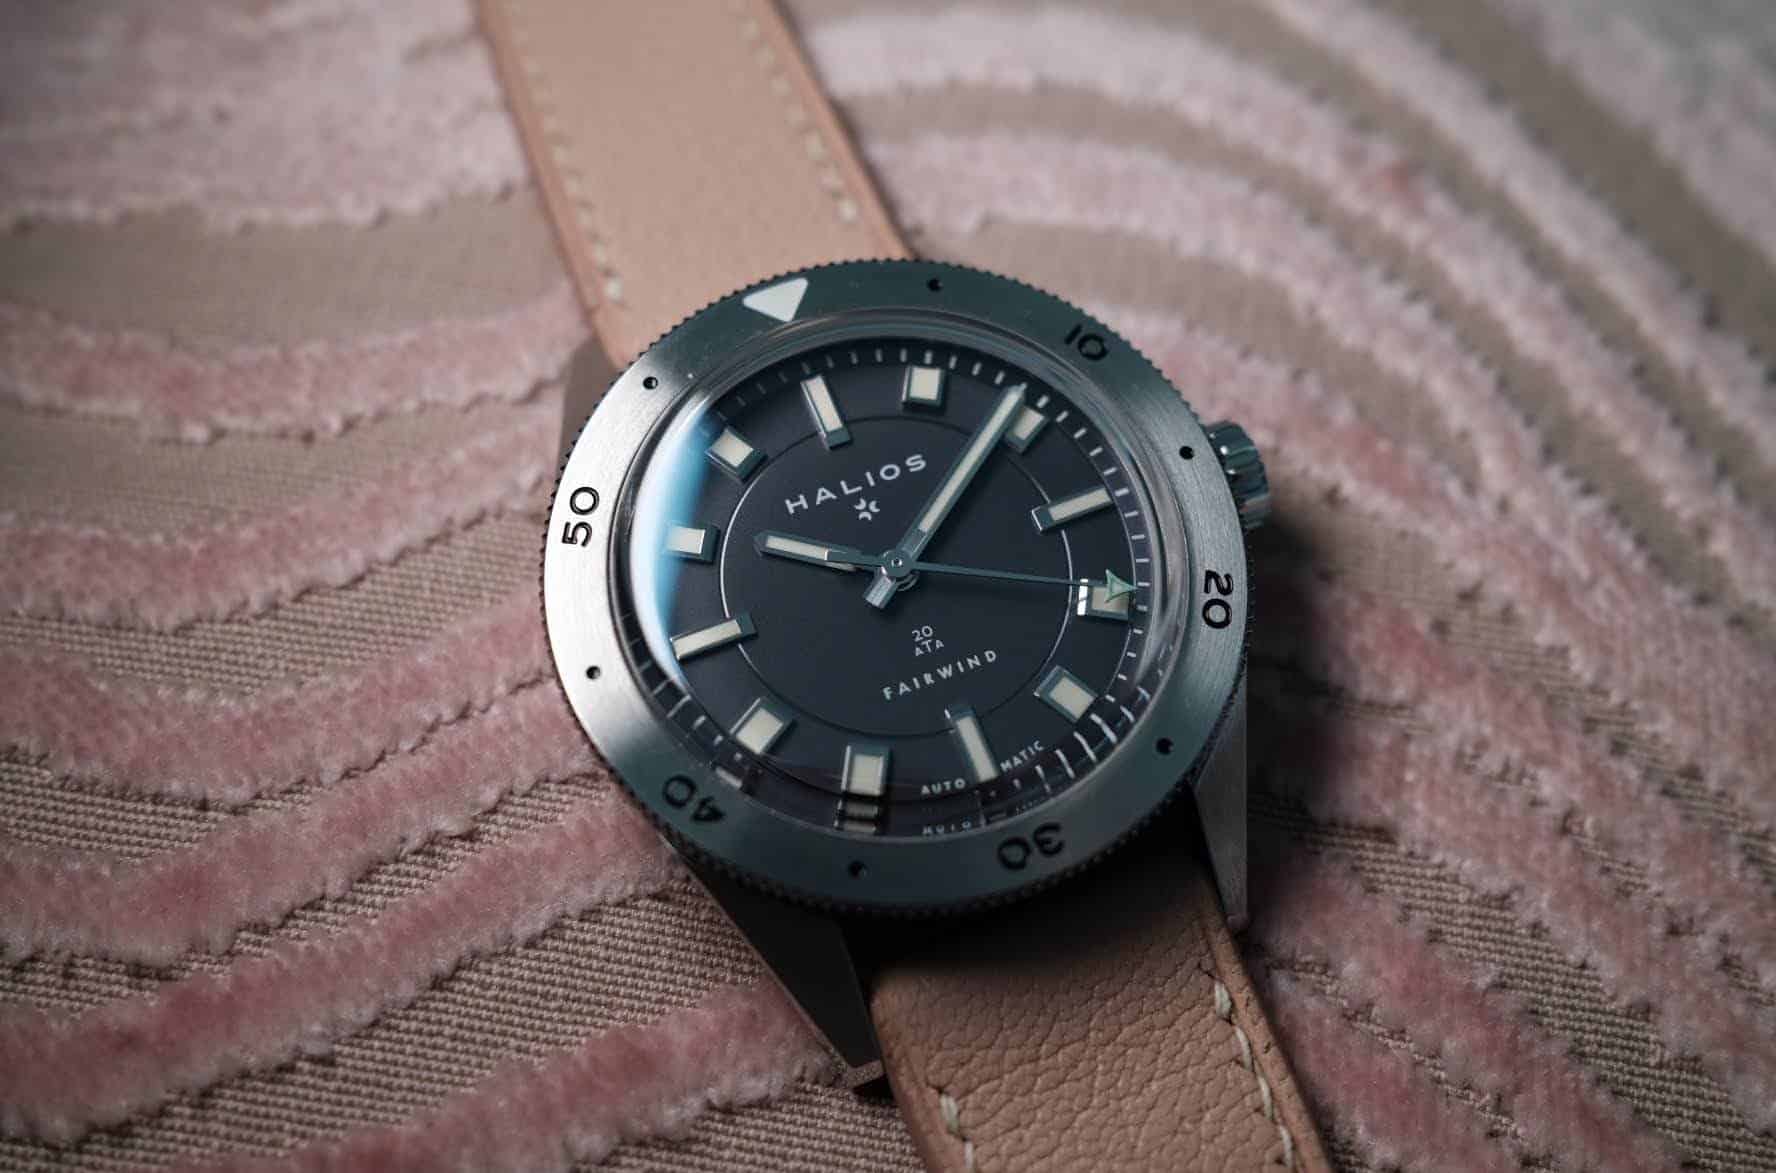 Lorier] What Microbrand is Currently Producing The Best Watches? : r/Watches